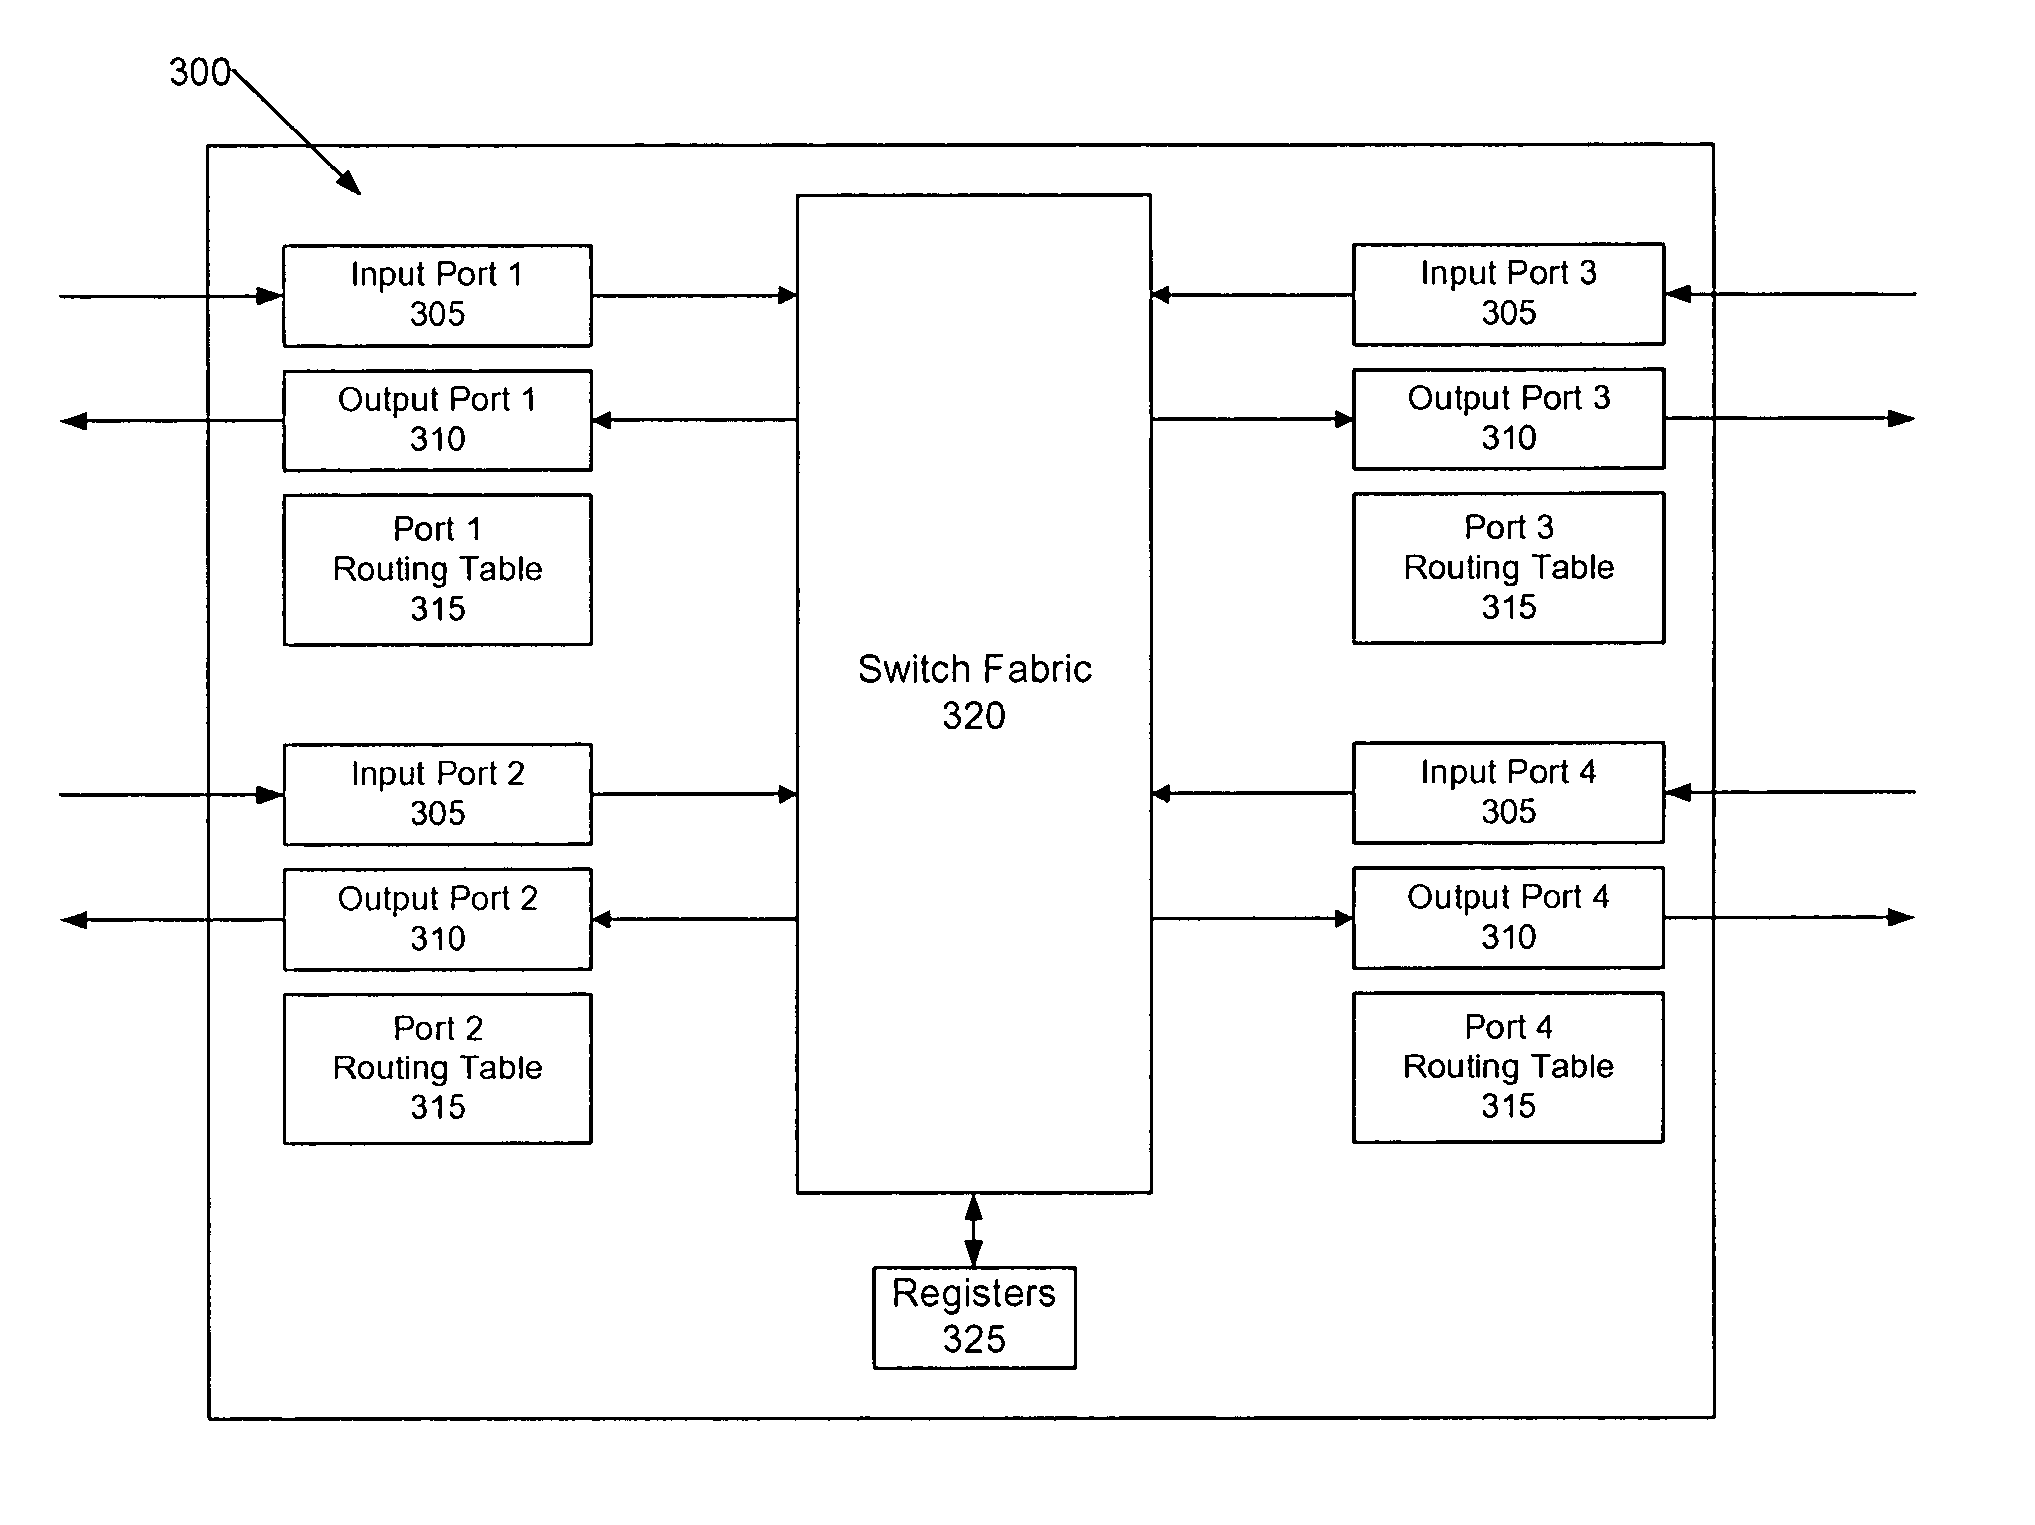 System for configuring switches in a network